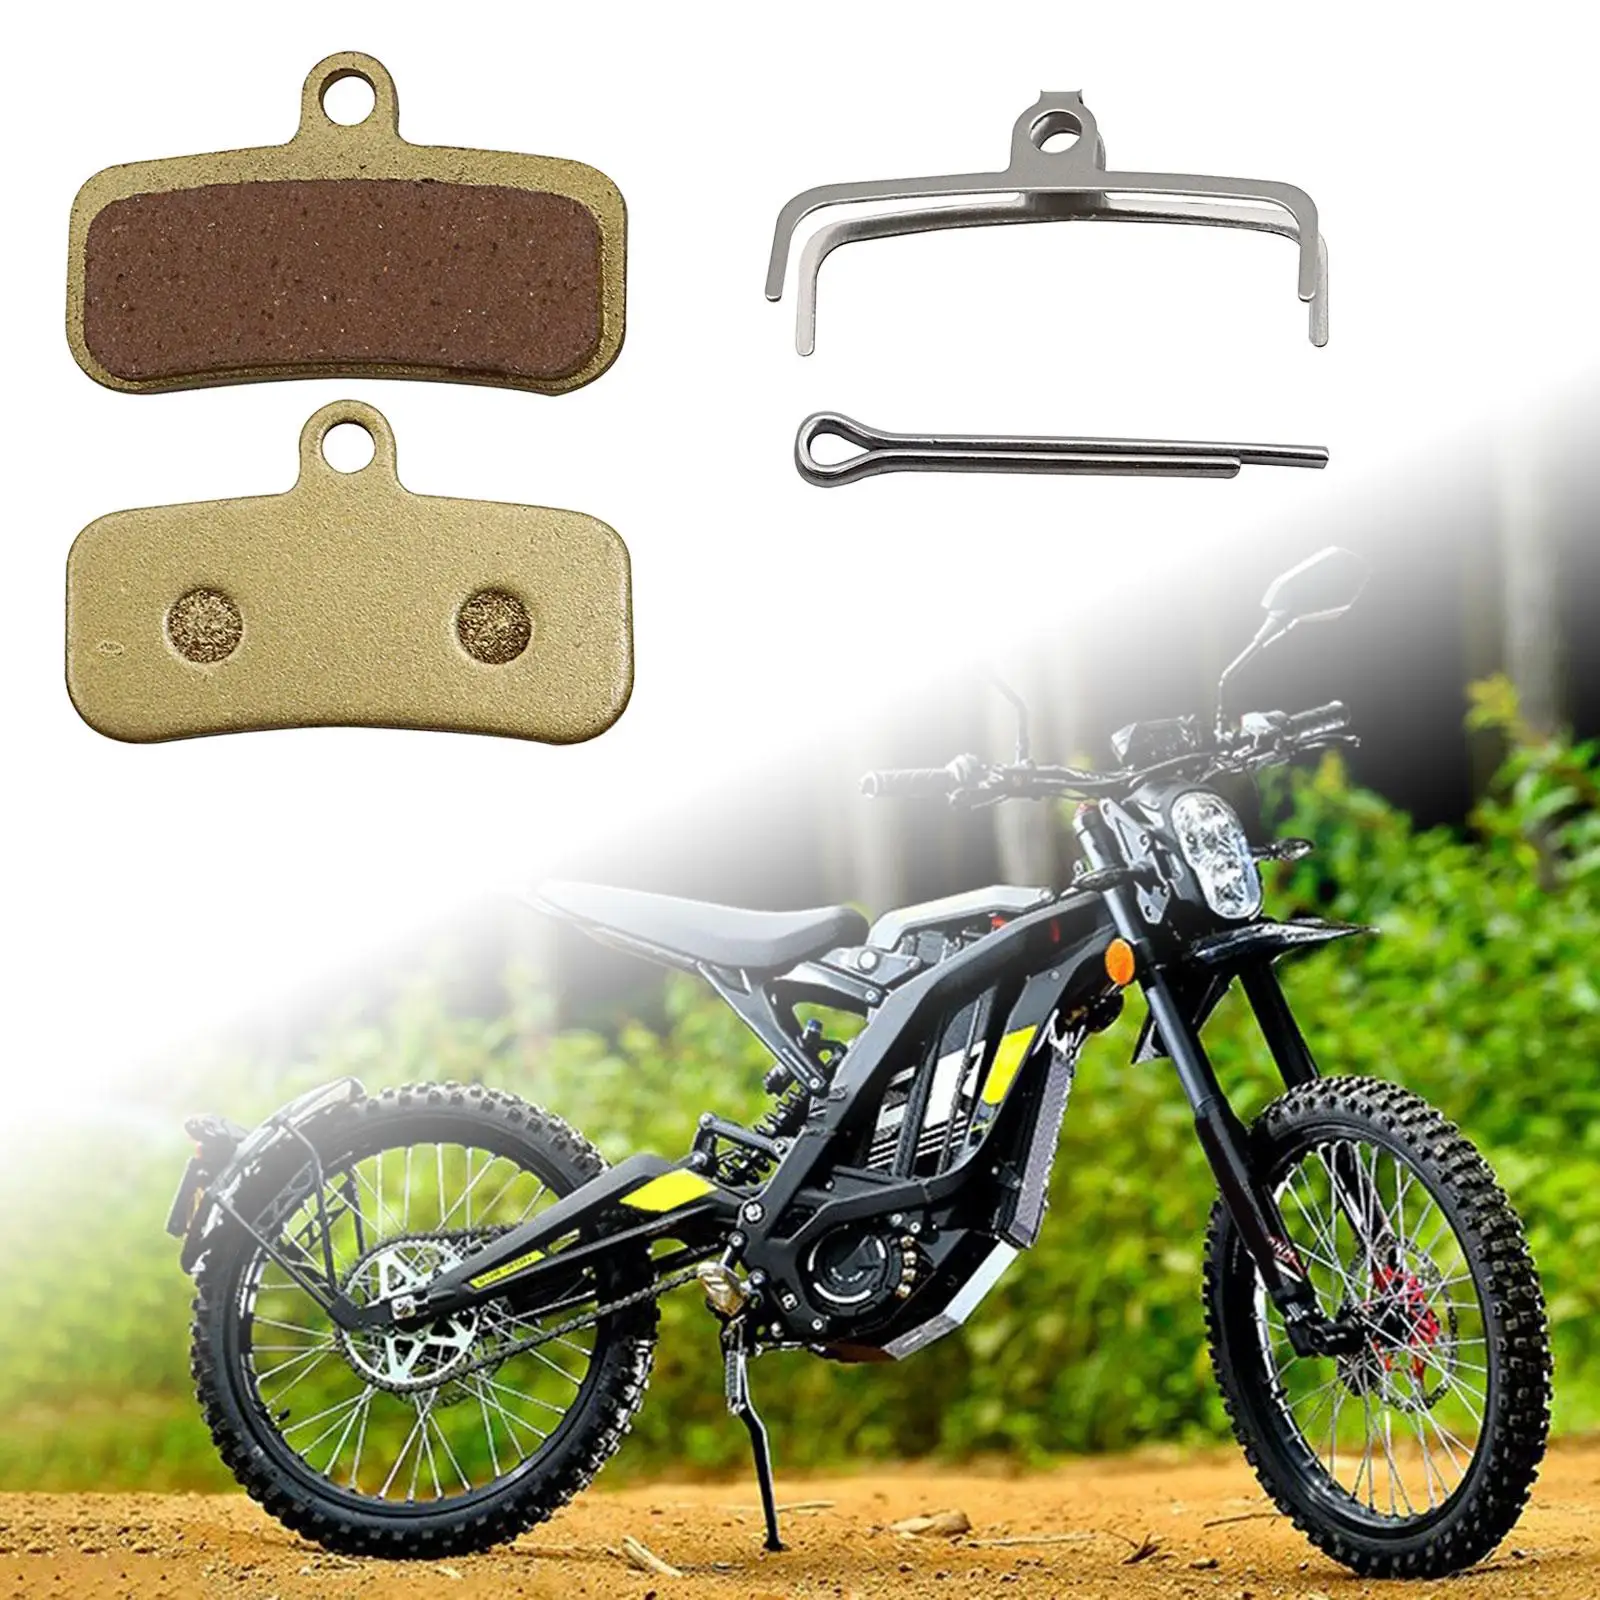 2x Motorcycle Front and Rear Brake Pads Motocross Modification Accessories for